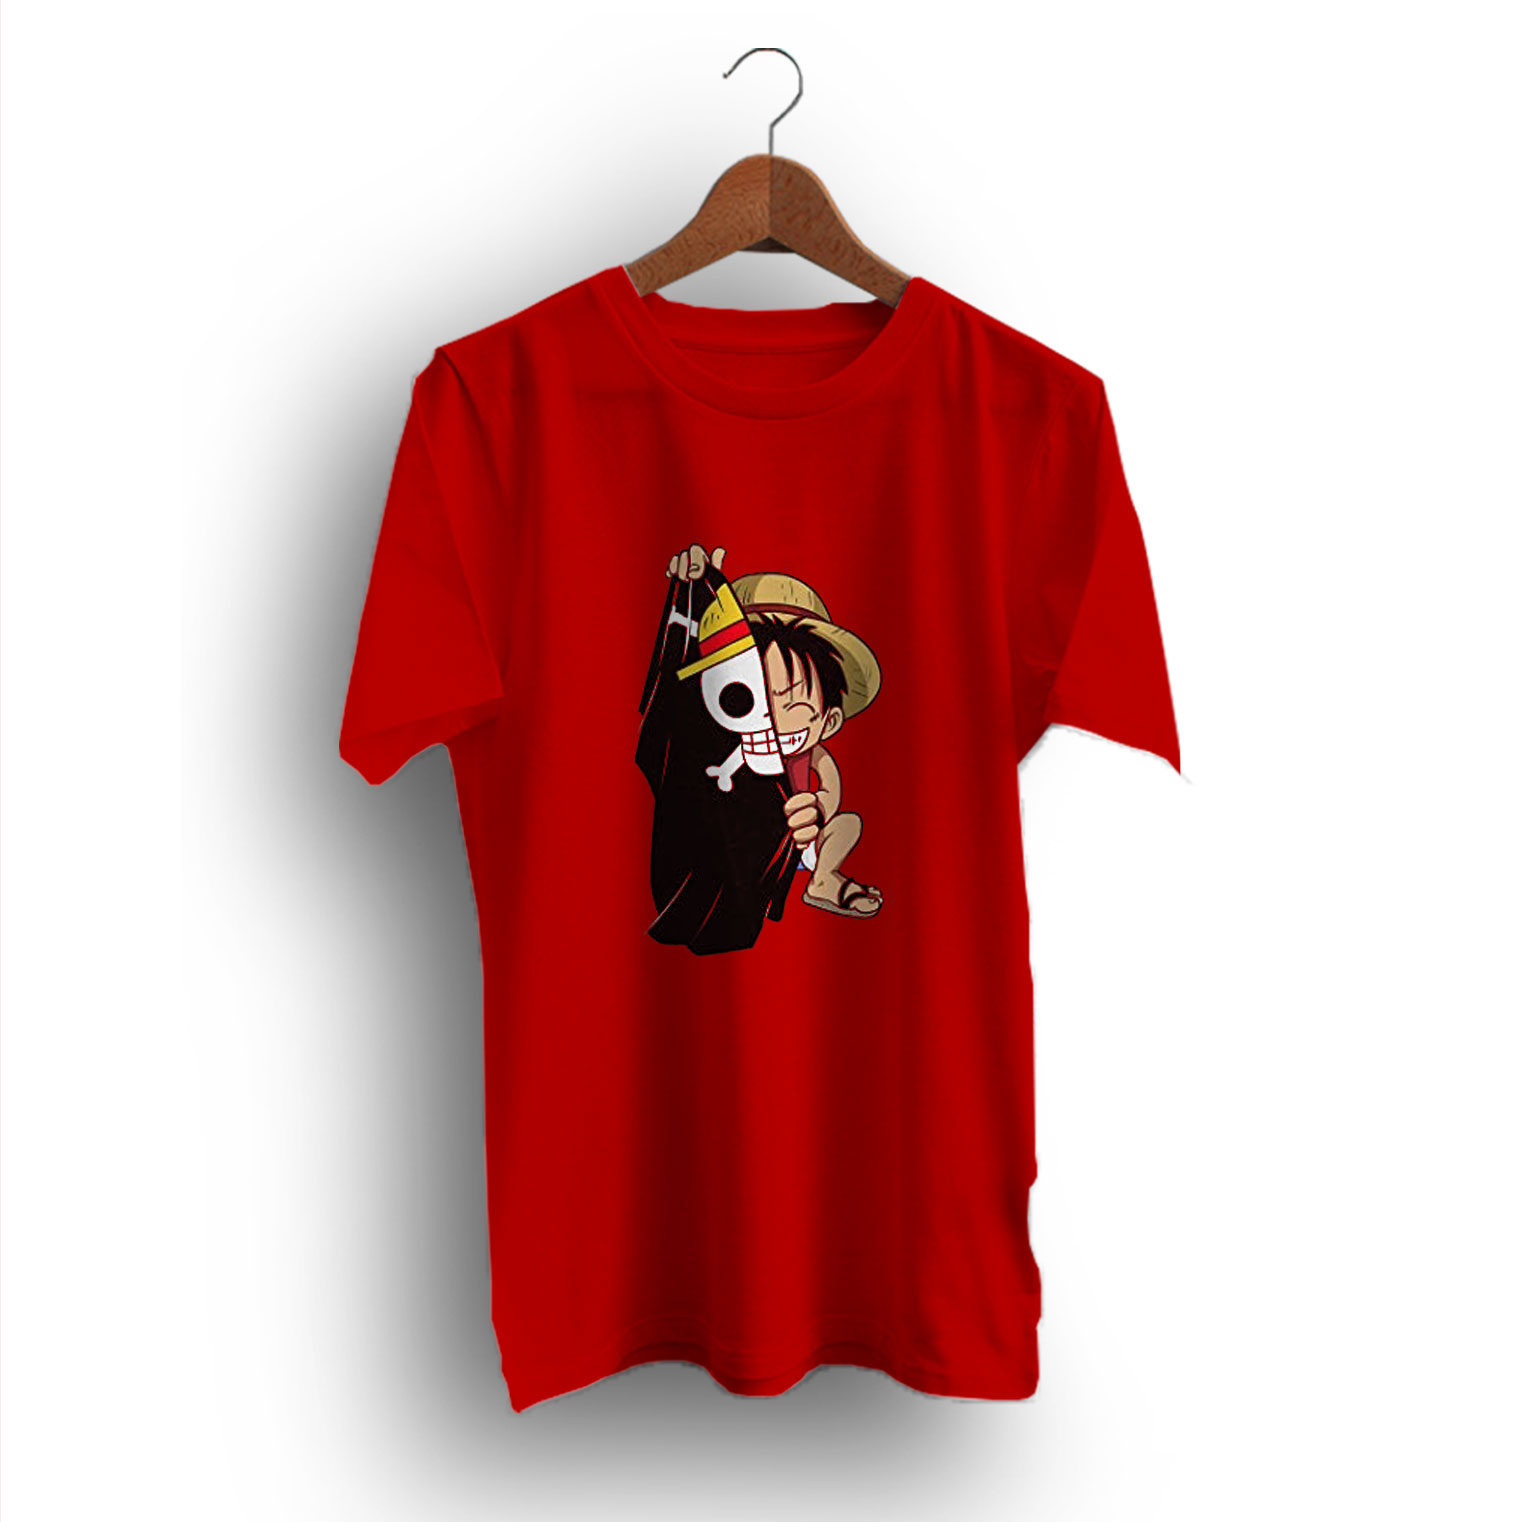 One Piece Red Luffy Outline T-Shirt